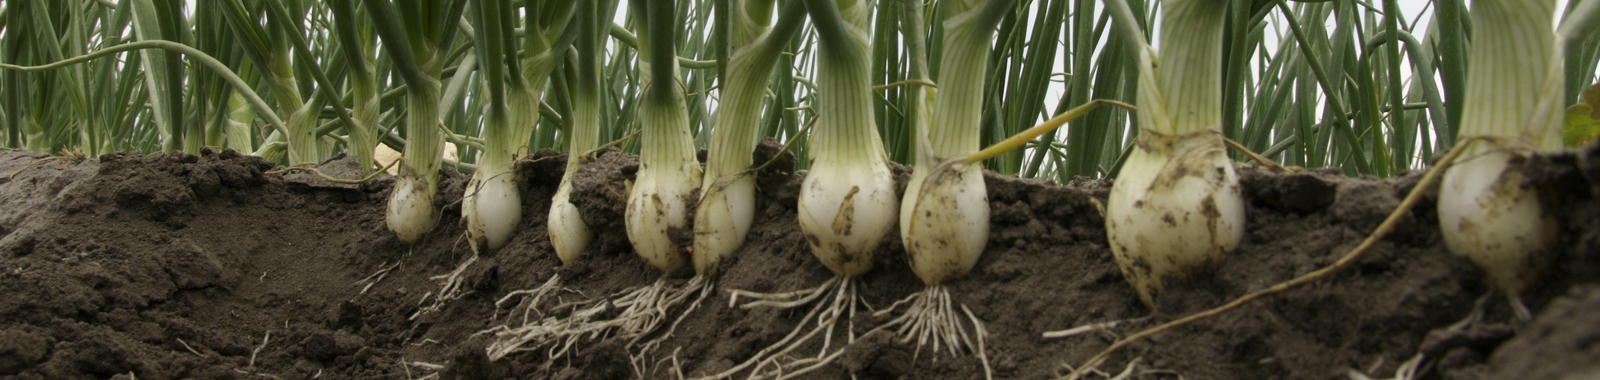 How to avoid chilling injury in onions